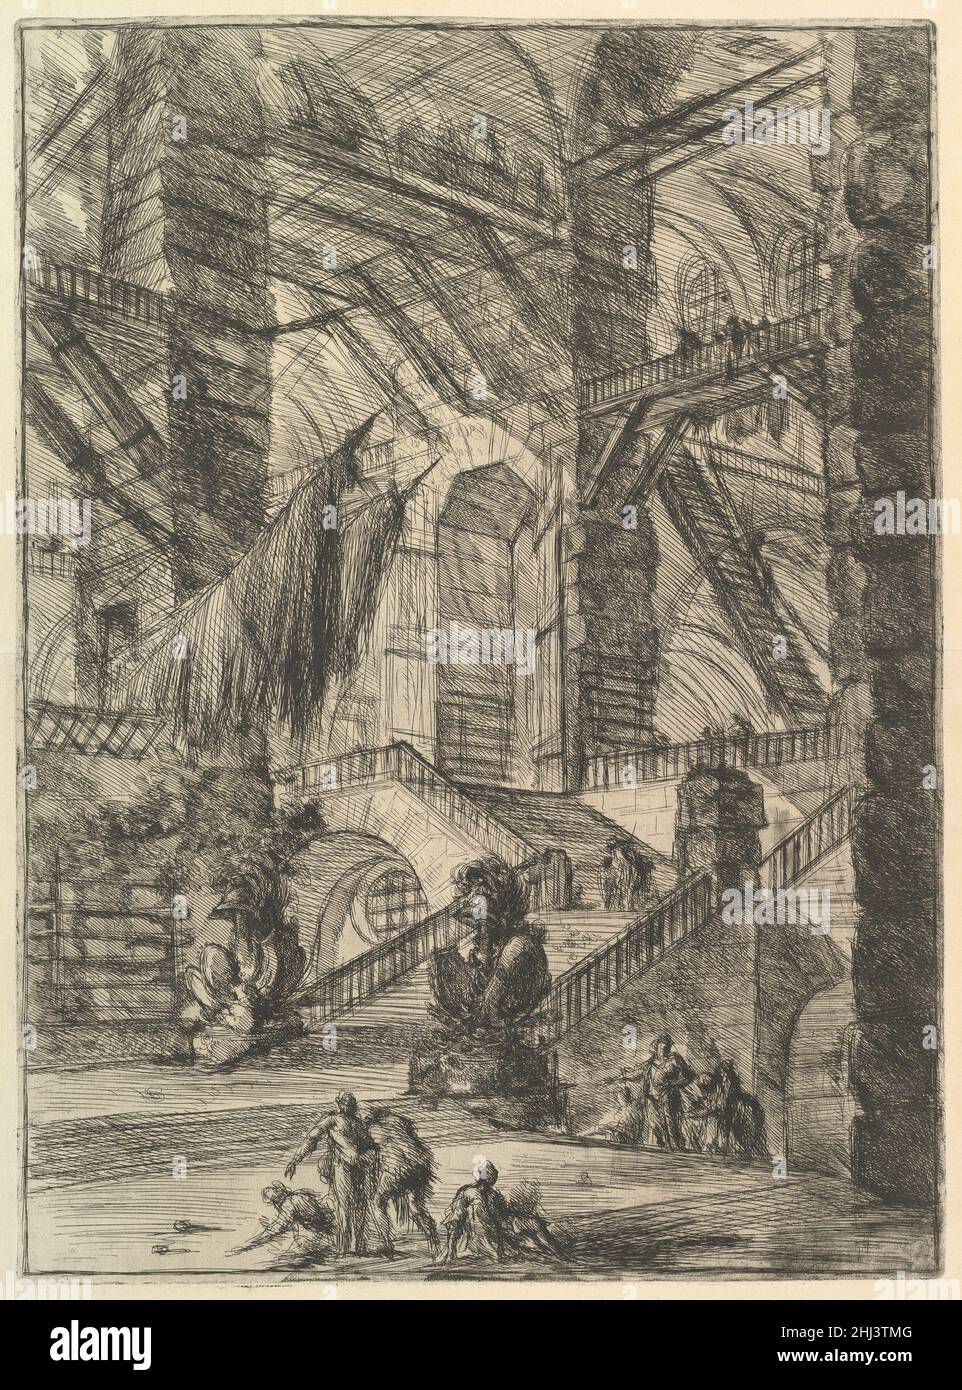 The Staircase with Trophies, from Carceri d'invenzione (Imaginary ...